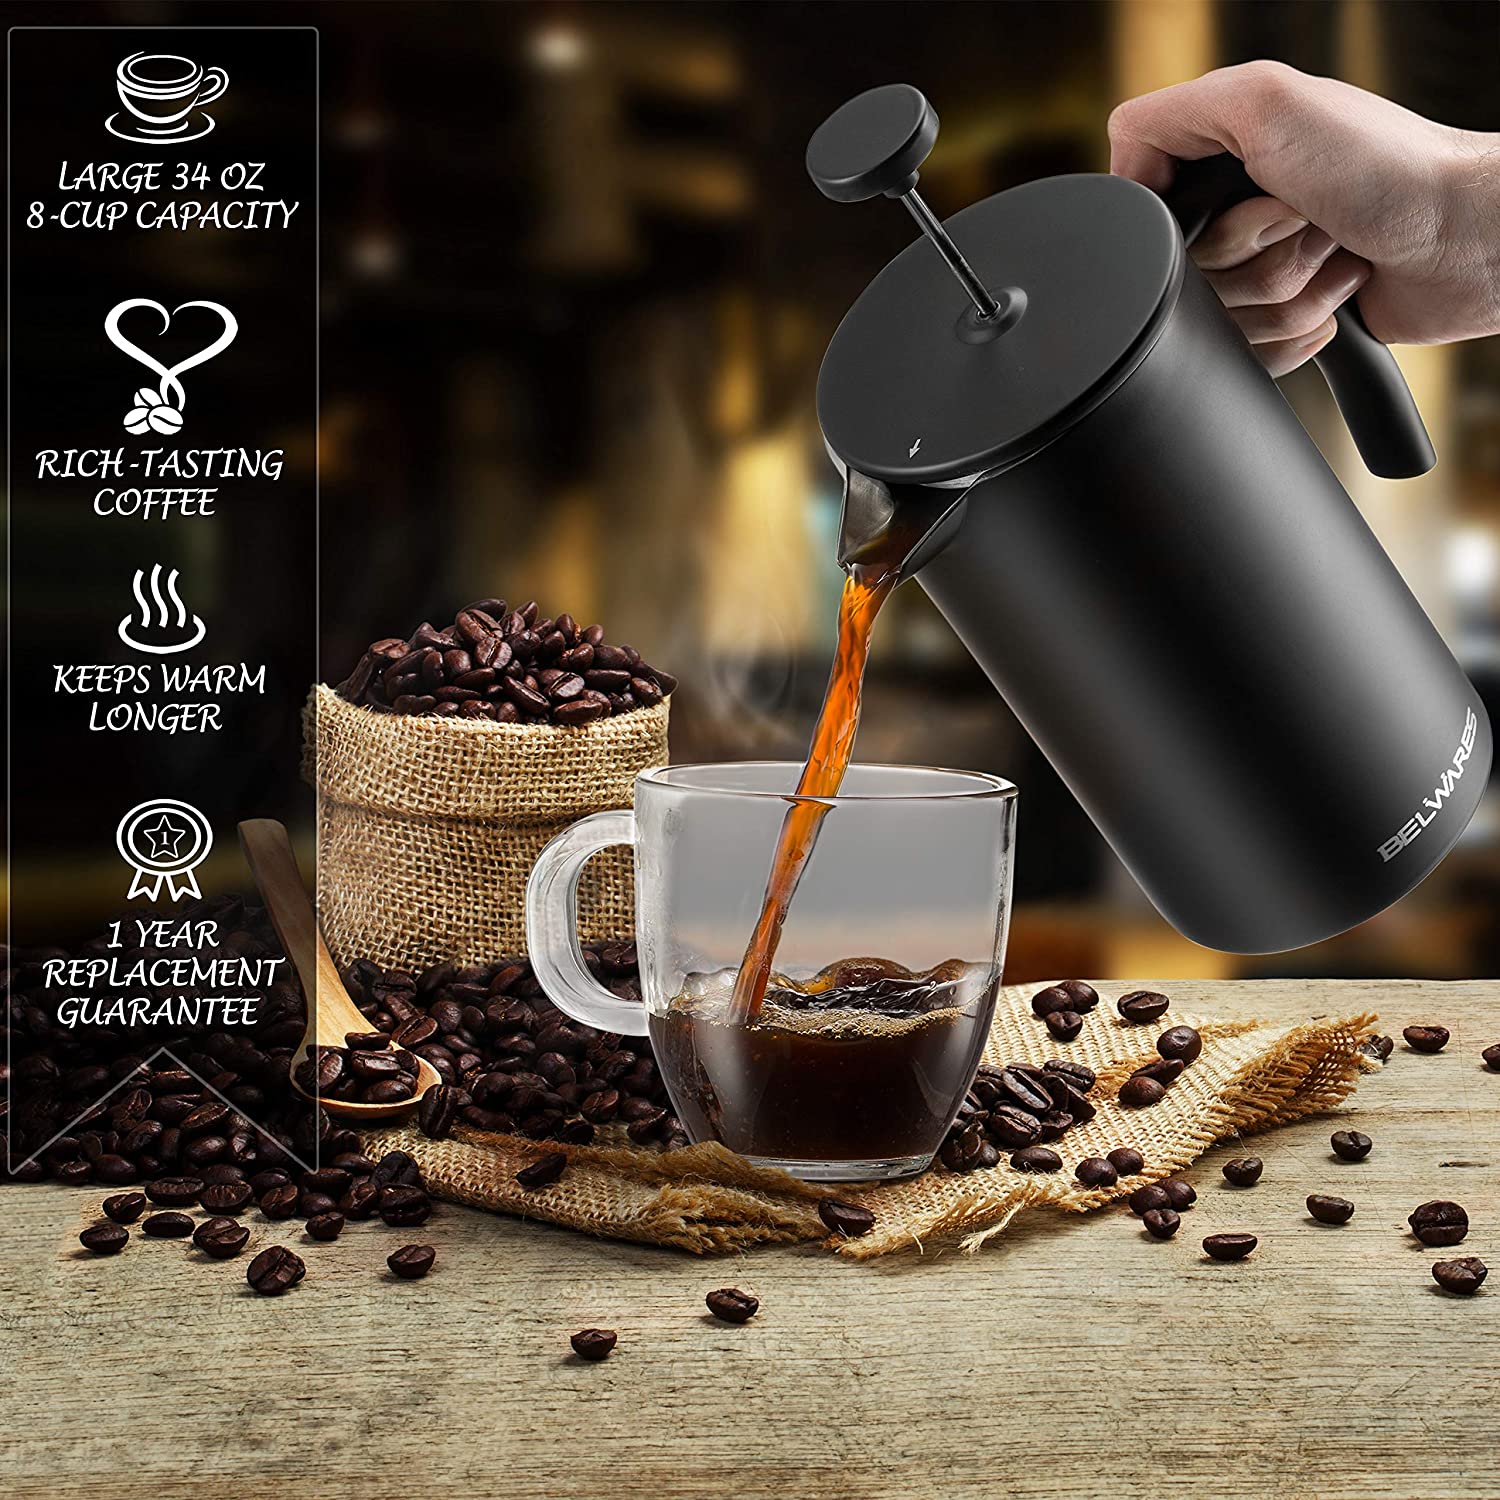 Belwares Stainless Steel French Coffee Press, With Double Wall and Extra  Filters - On Sale - Bed Bath & Beyond - 32606741